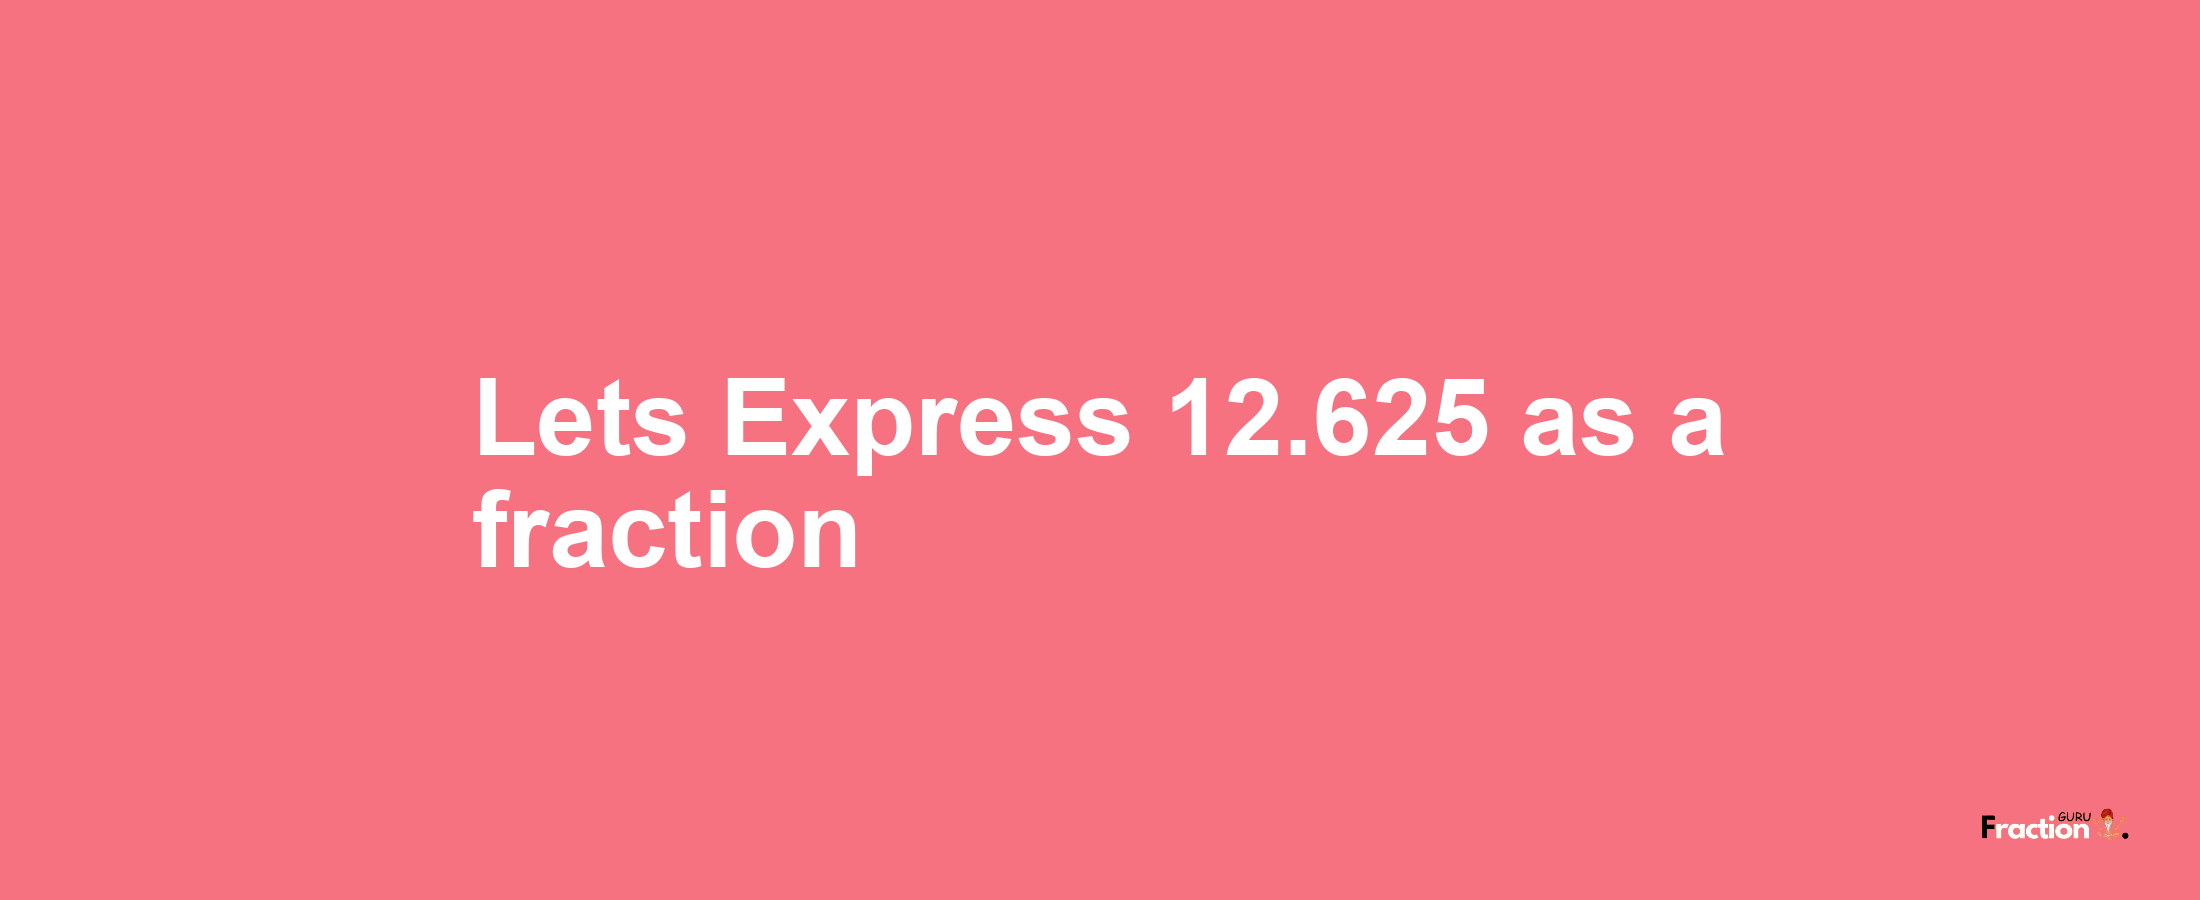 Lets Express 12.625 as afraction